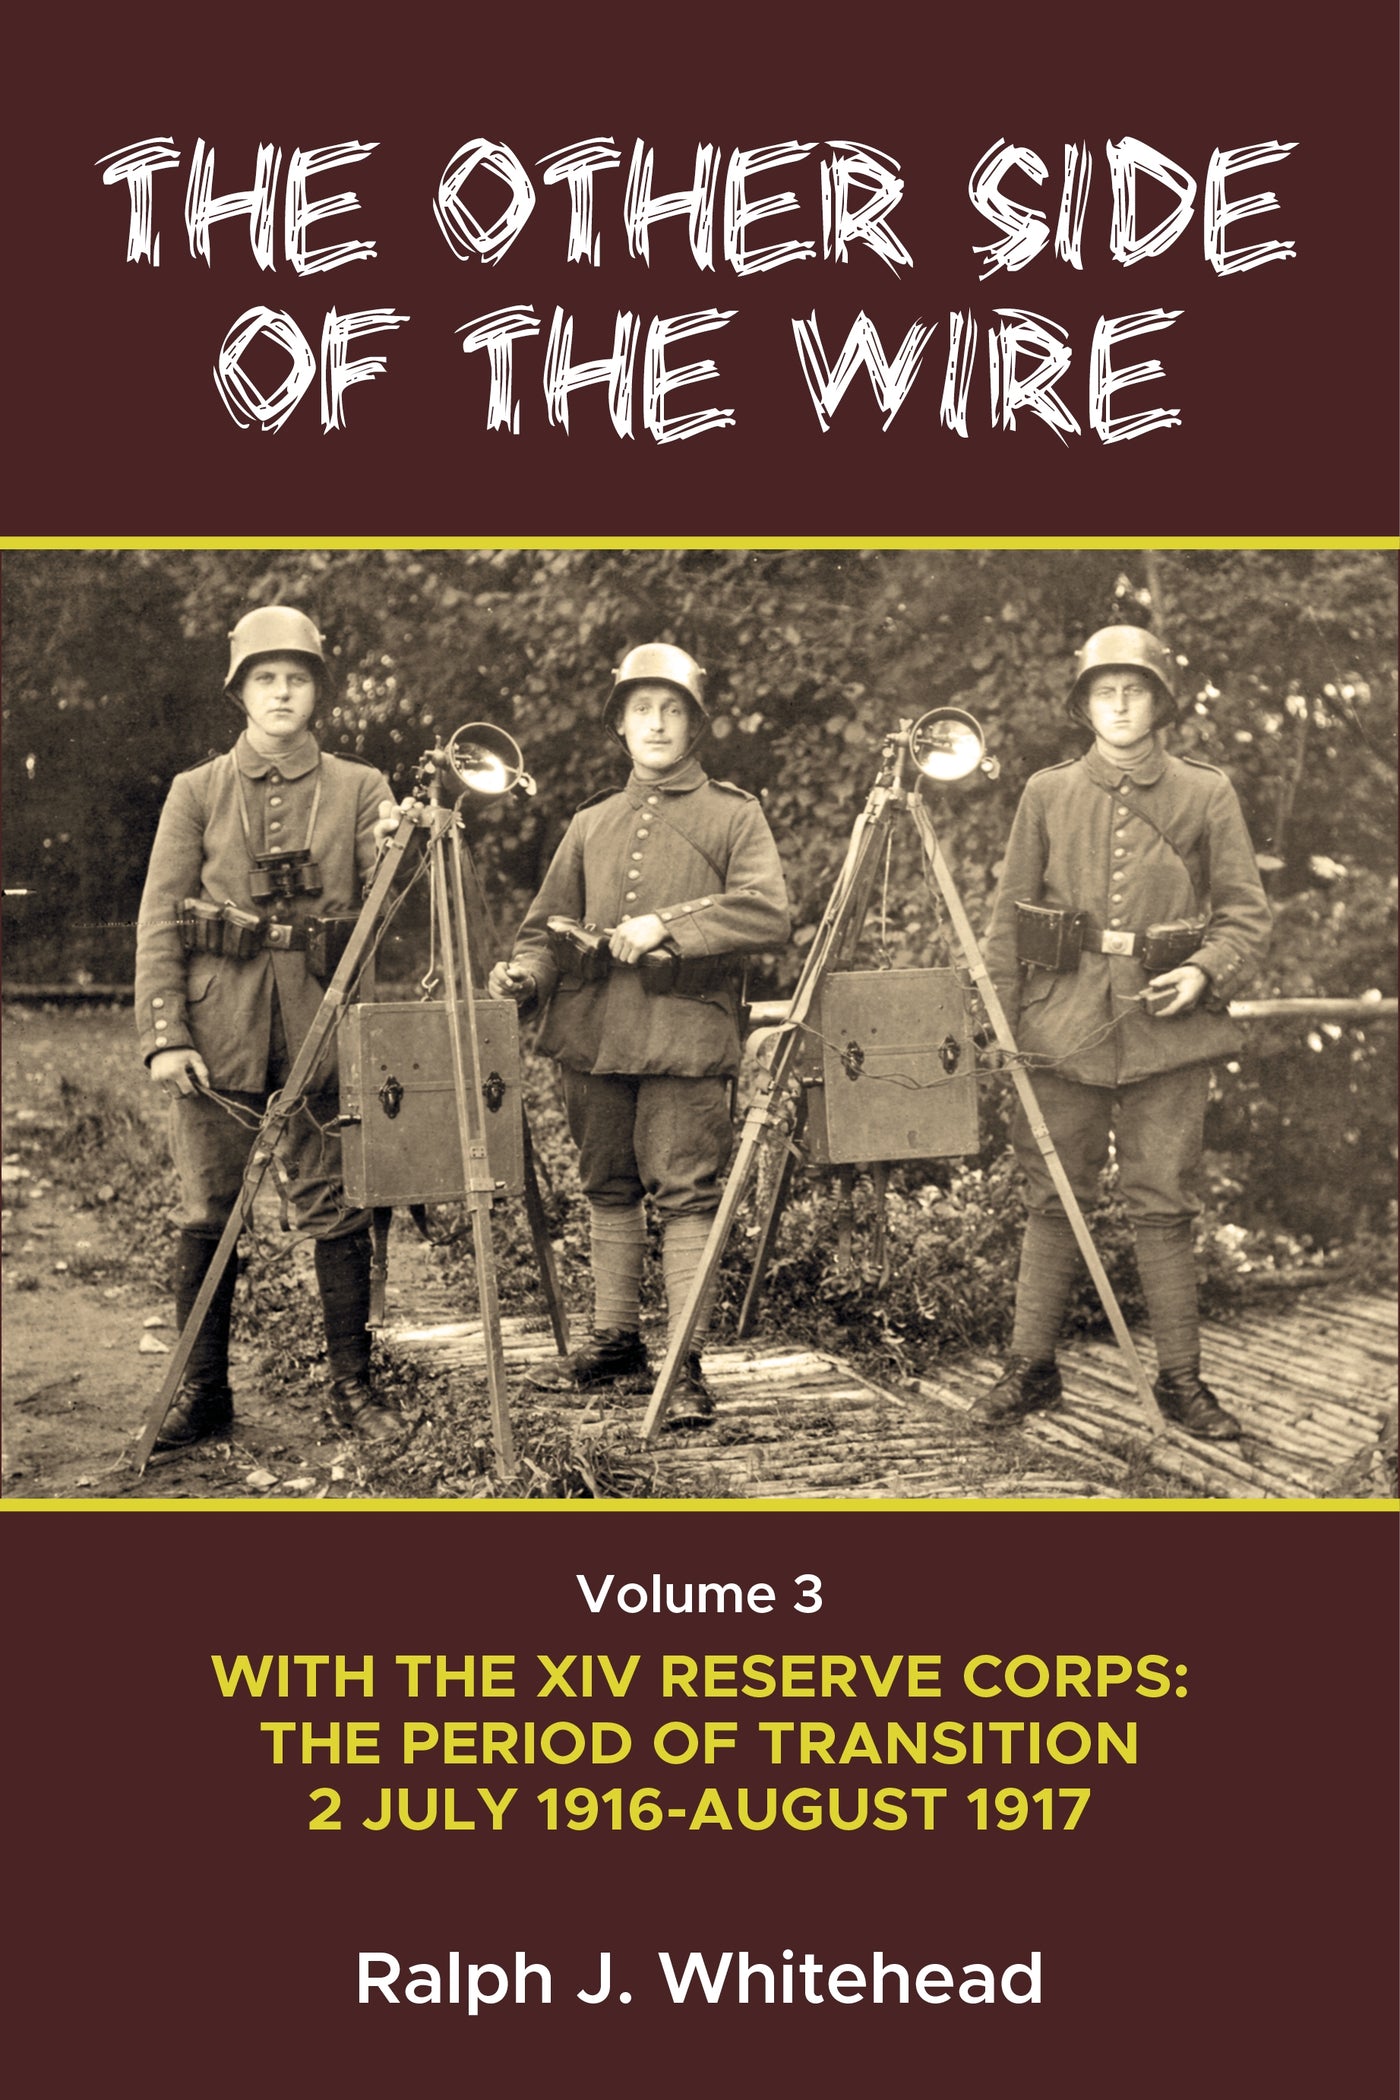 Other Side of the Wire Volume 3